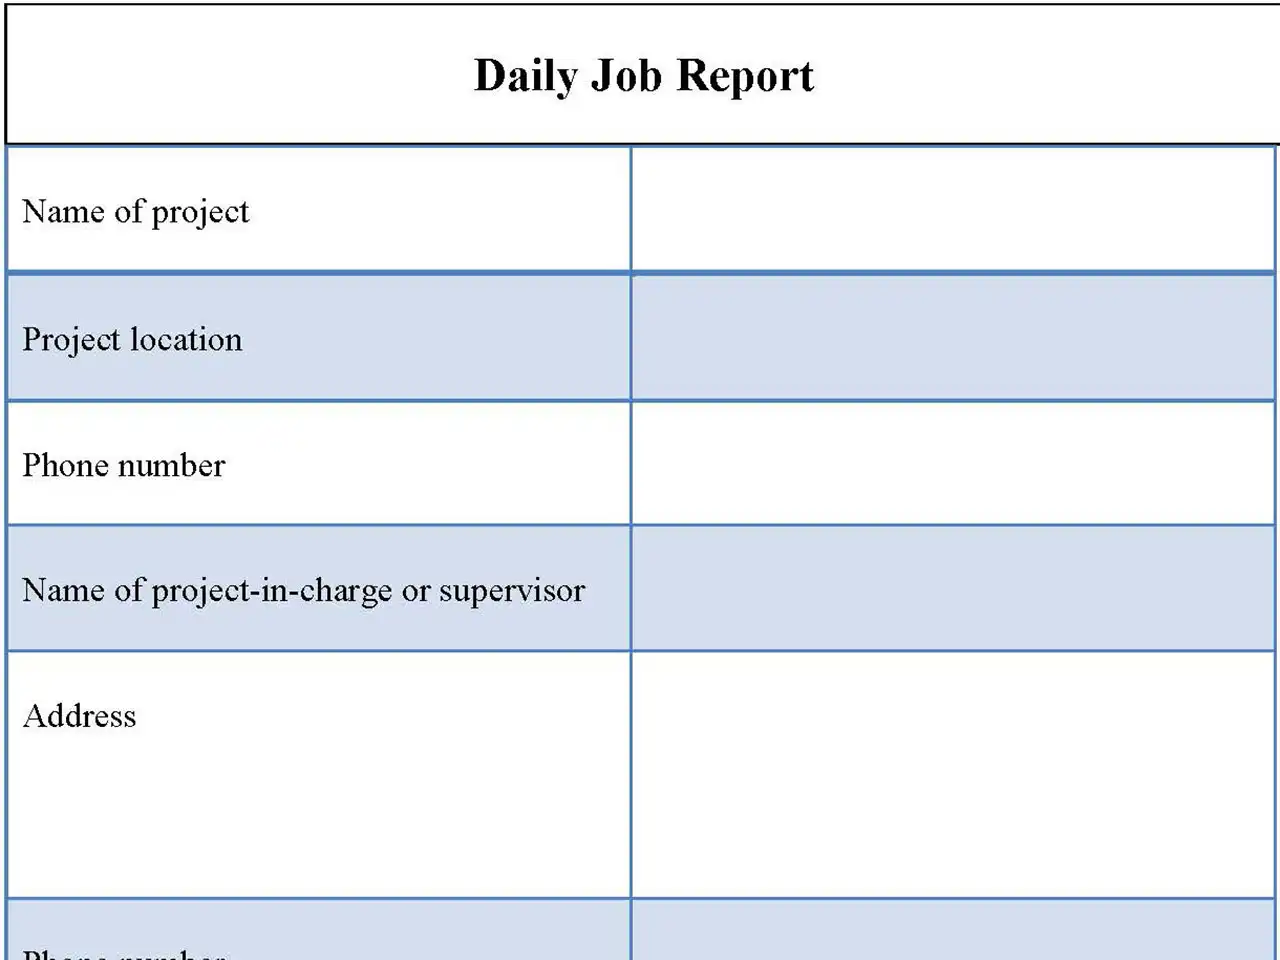 Daily Job Report Form